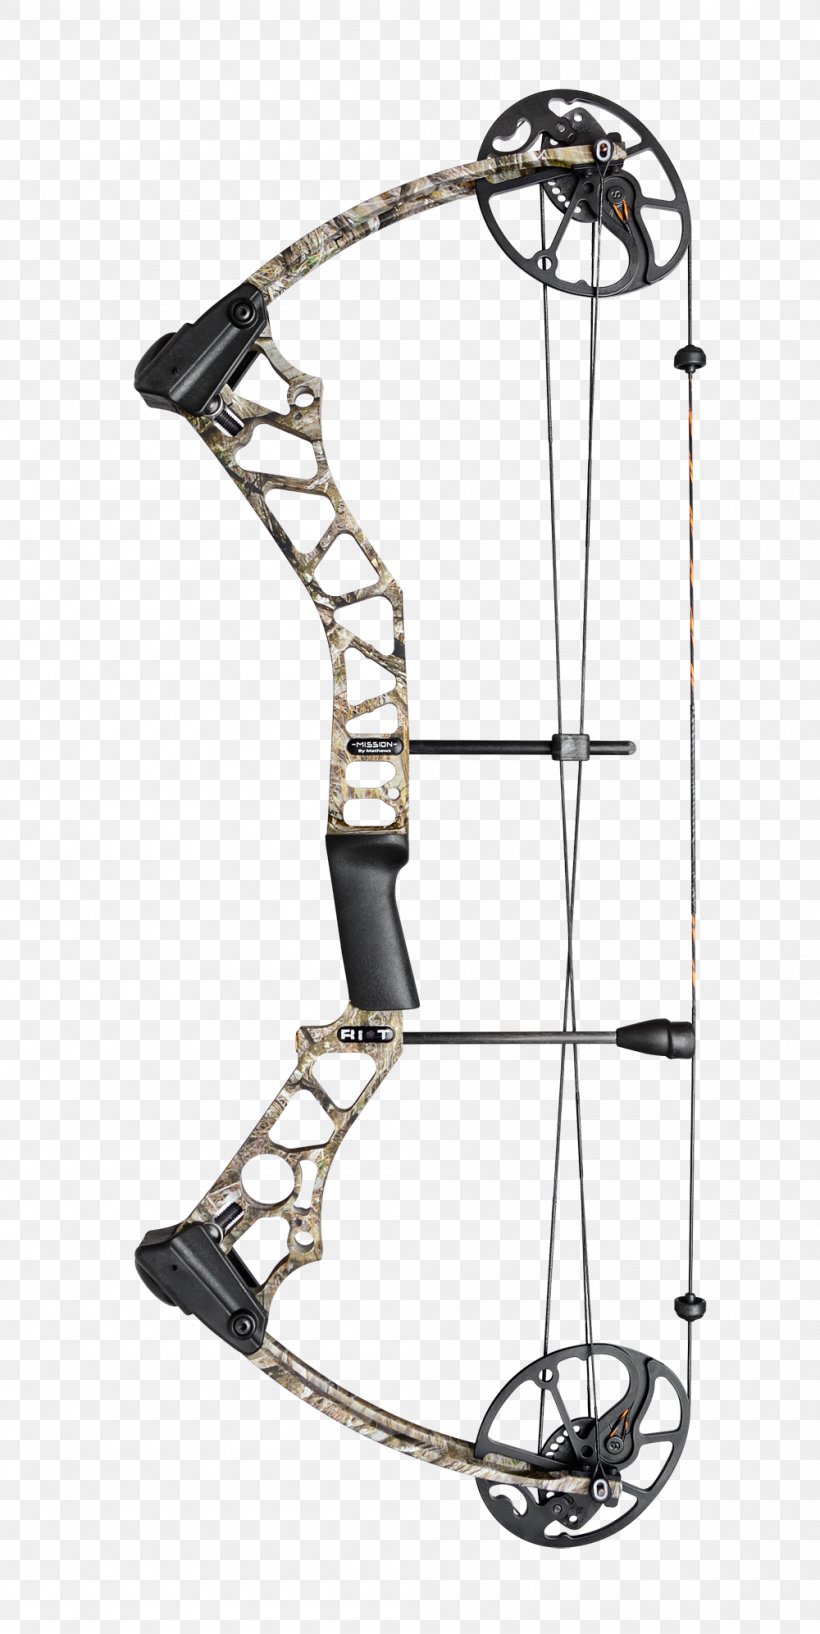 Bow And Arrow Archery Compound Bows Crossbow Bowhunting, PNG, 1000x1993px, Bow And Arrow, Archery, Ballistics, Bit, Borkholder Archery Download Free